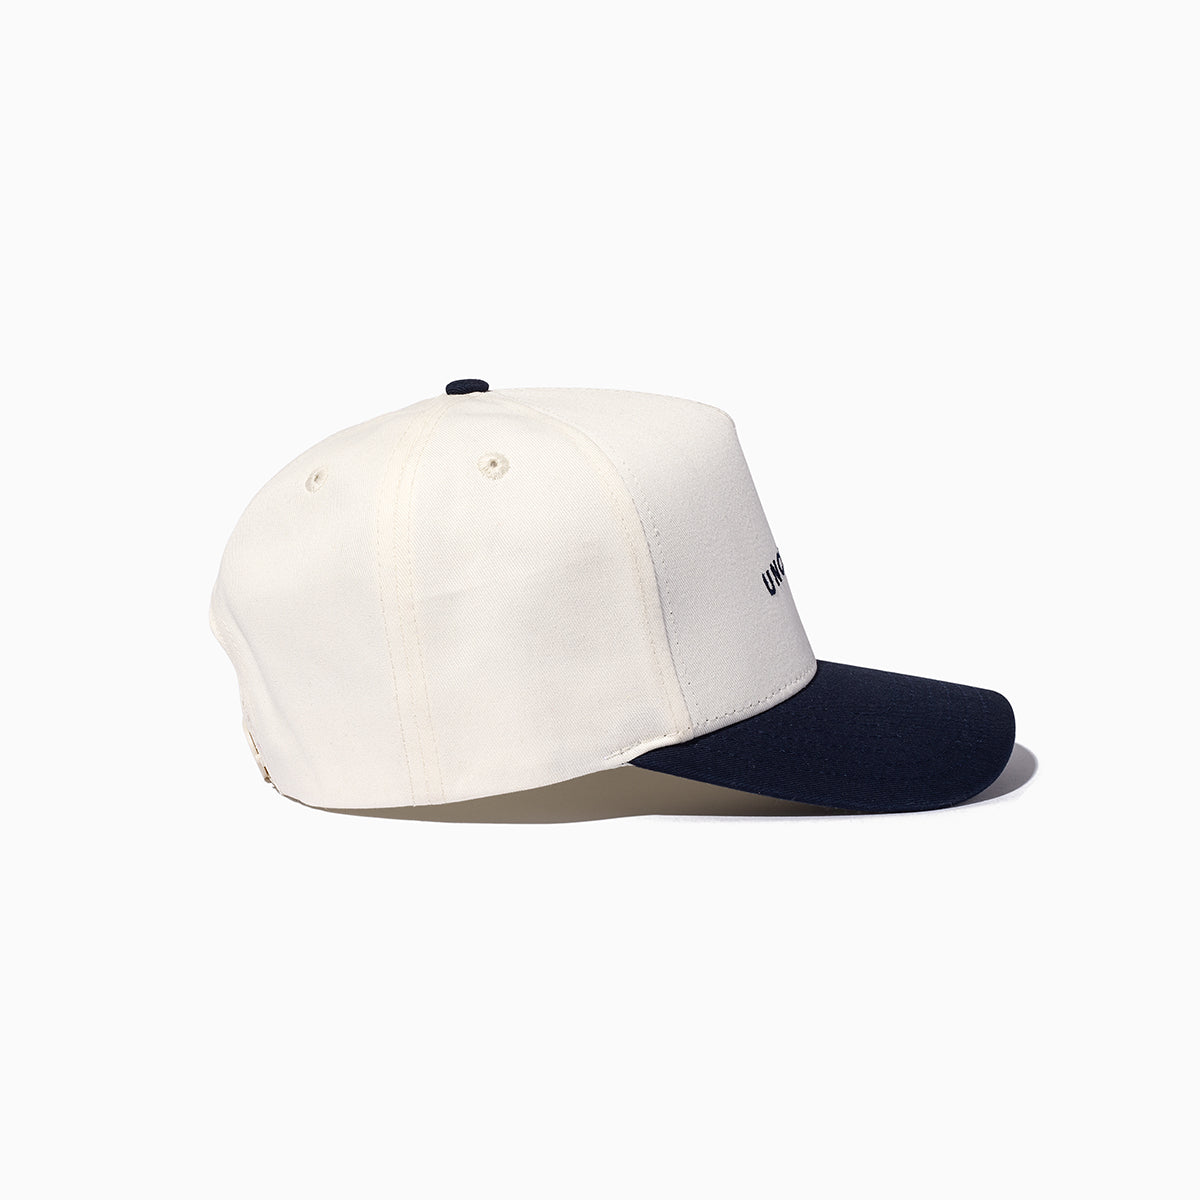 Simple Uncommon Trucker Hat | Navy/White | Product Detail Image | Uncommon Lifestyle